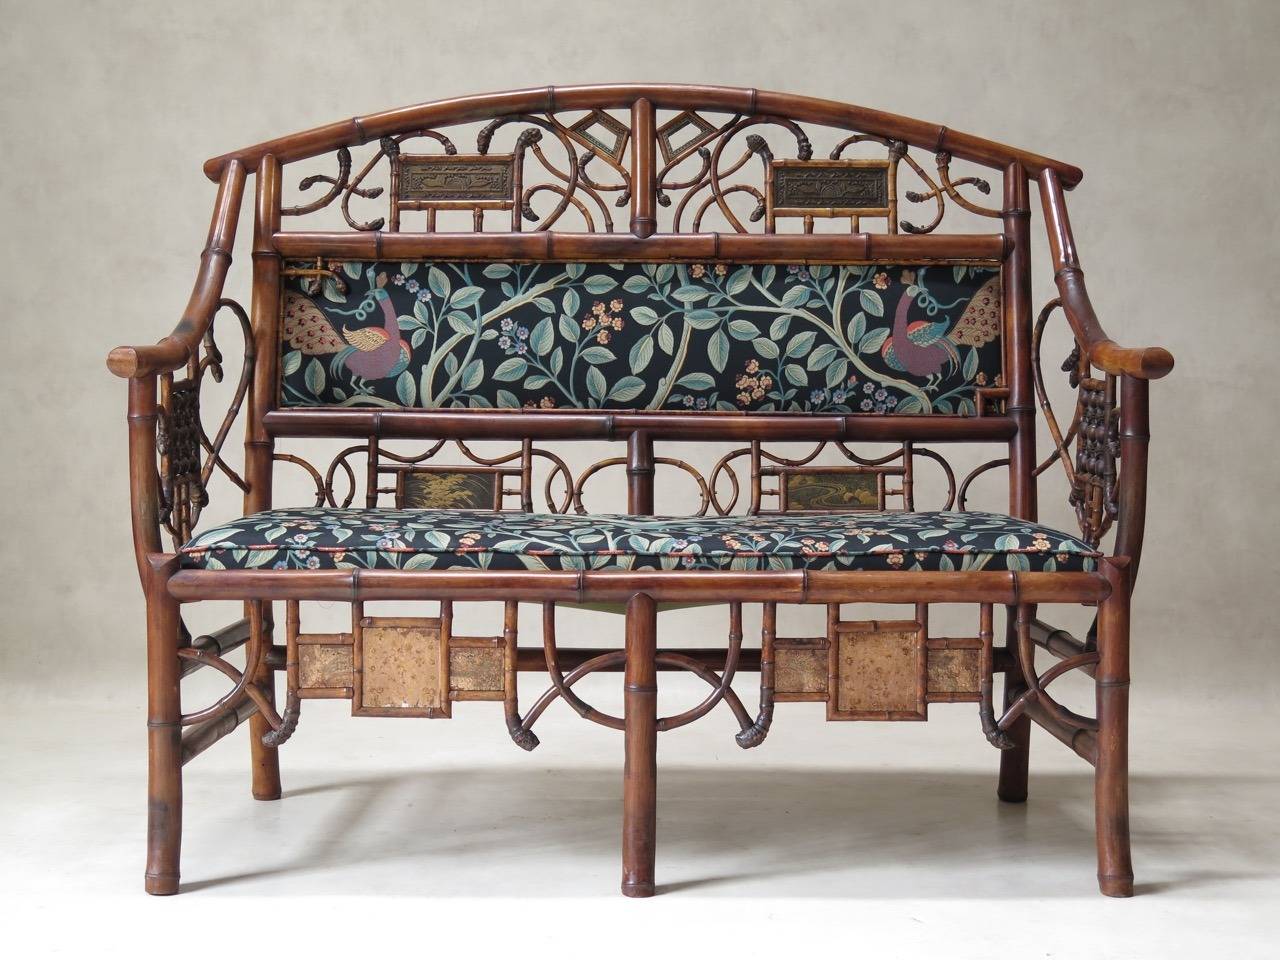 Charming and decorative bamboo living-room set comprised of a settee, two armchairs (not matching) and two high-backed chairs. Seats and backs newly upholstered in vintage fabric with a floral and bird motif on a dark background.

Dimensions